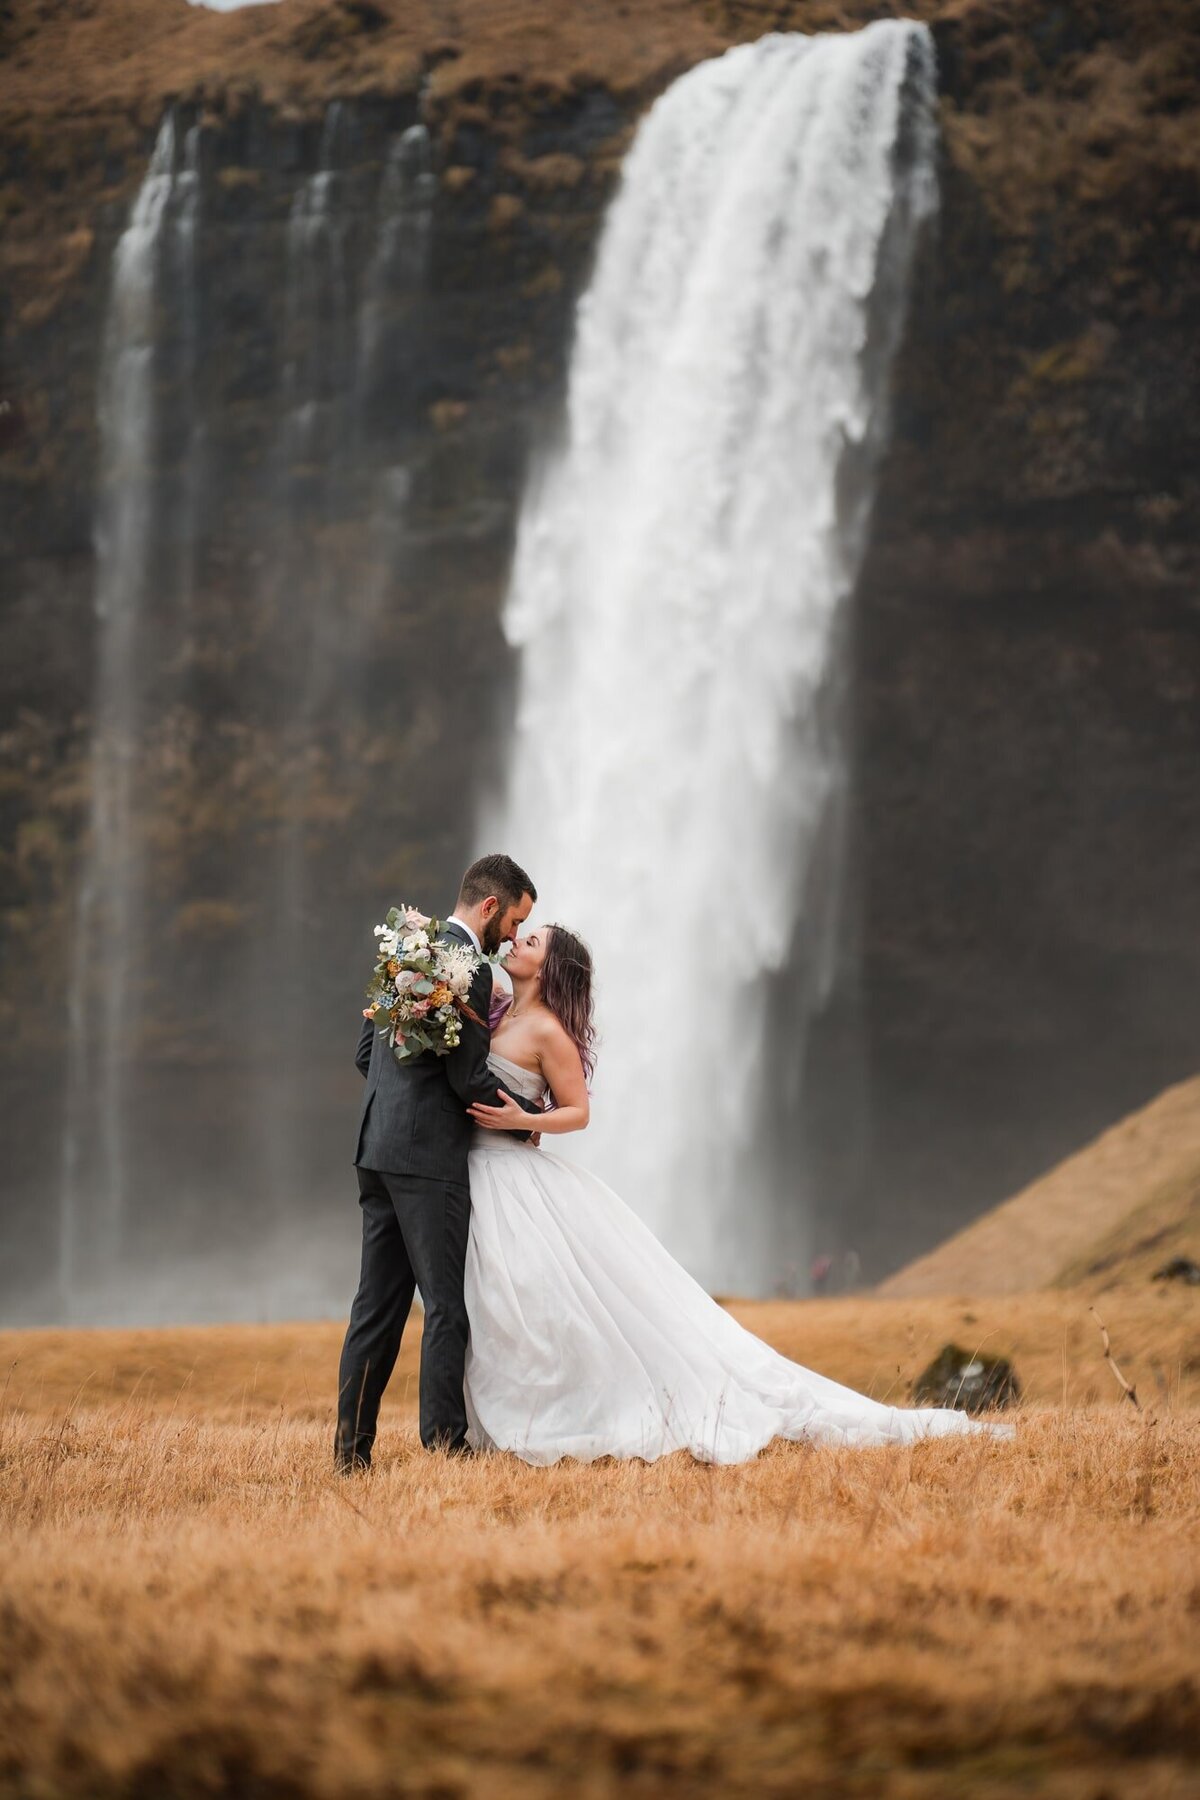 With a waterfall as their enchanting backdrop, this couple shares a nearly-kissing moment, capturing the magic of love amidst the beauty of Iceland.